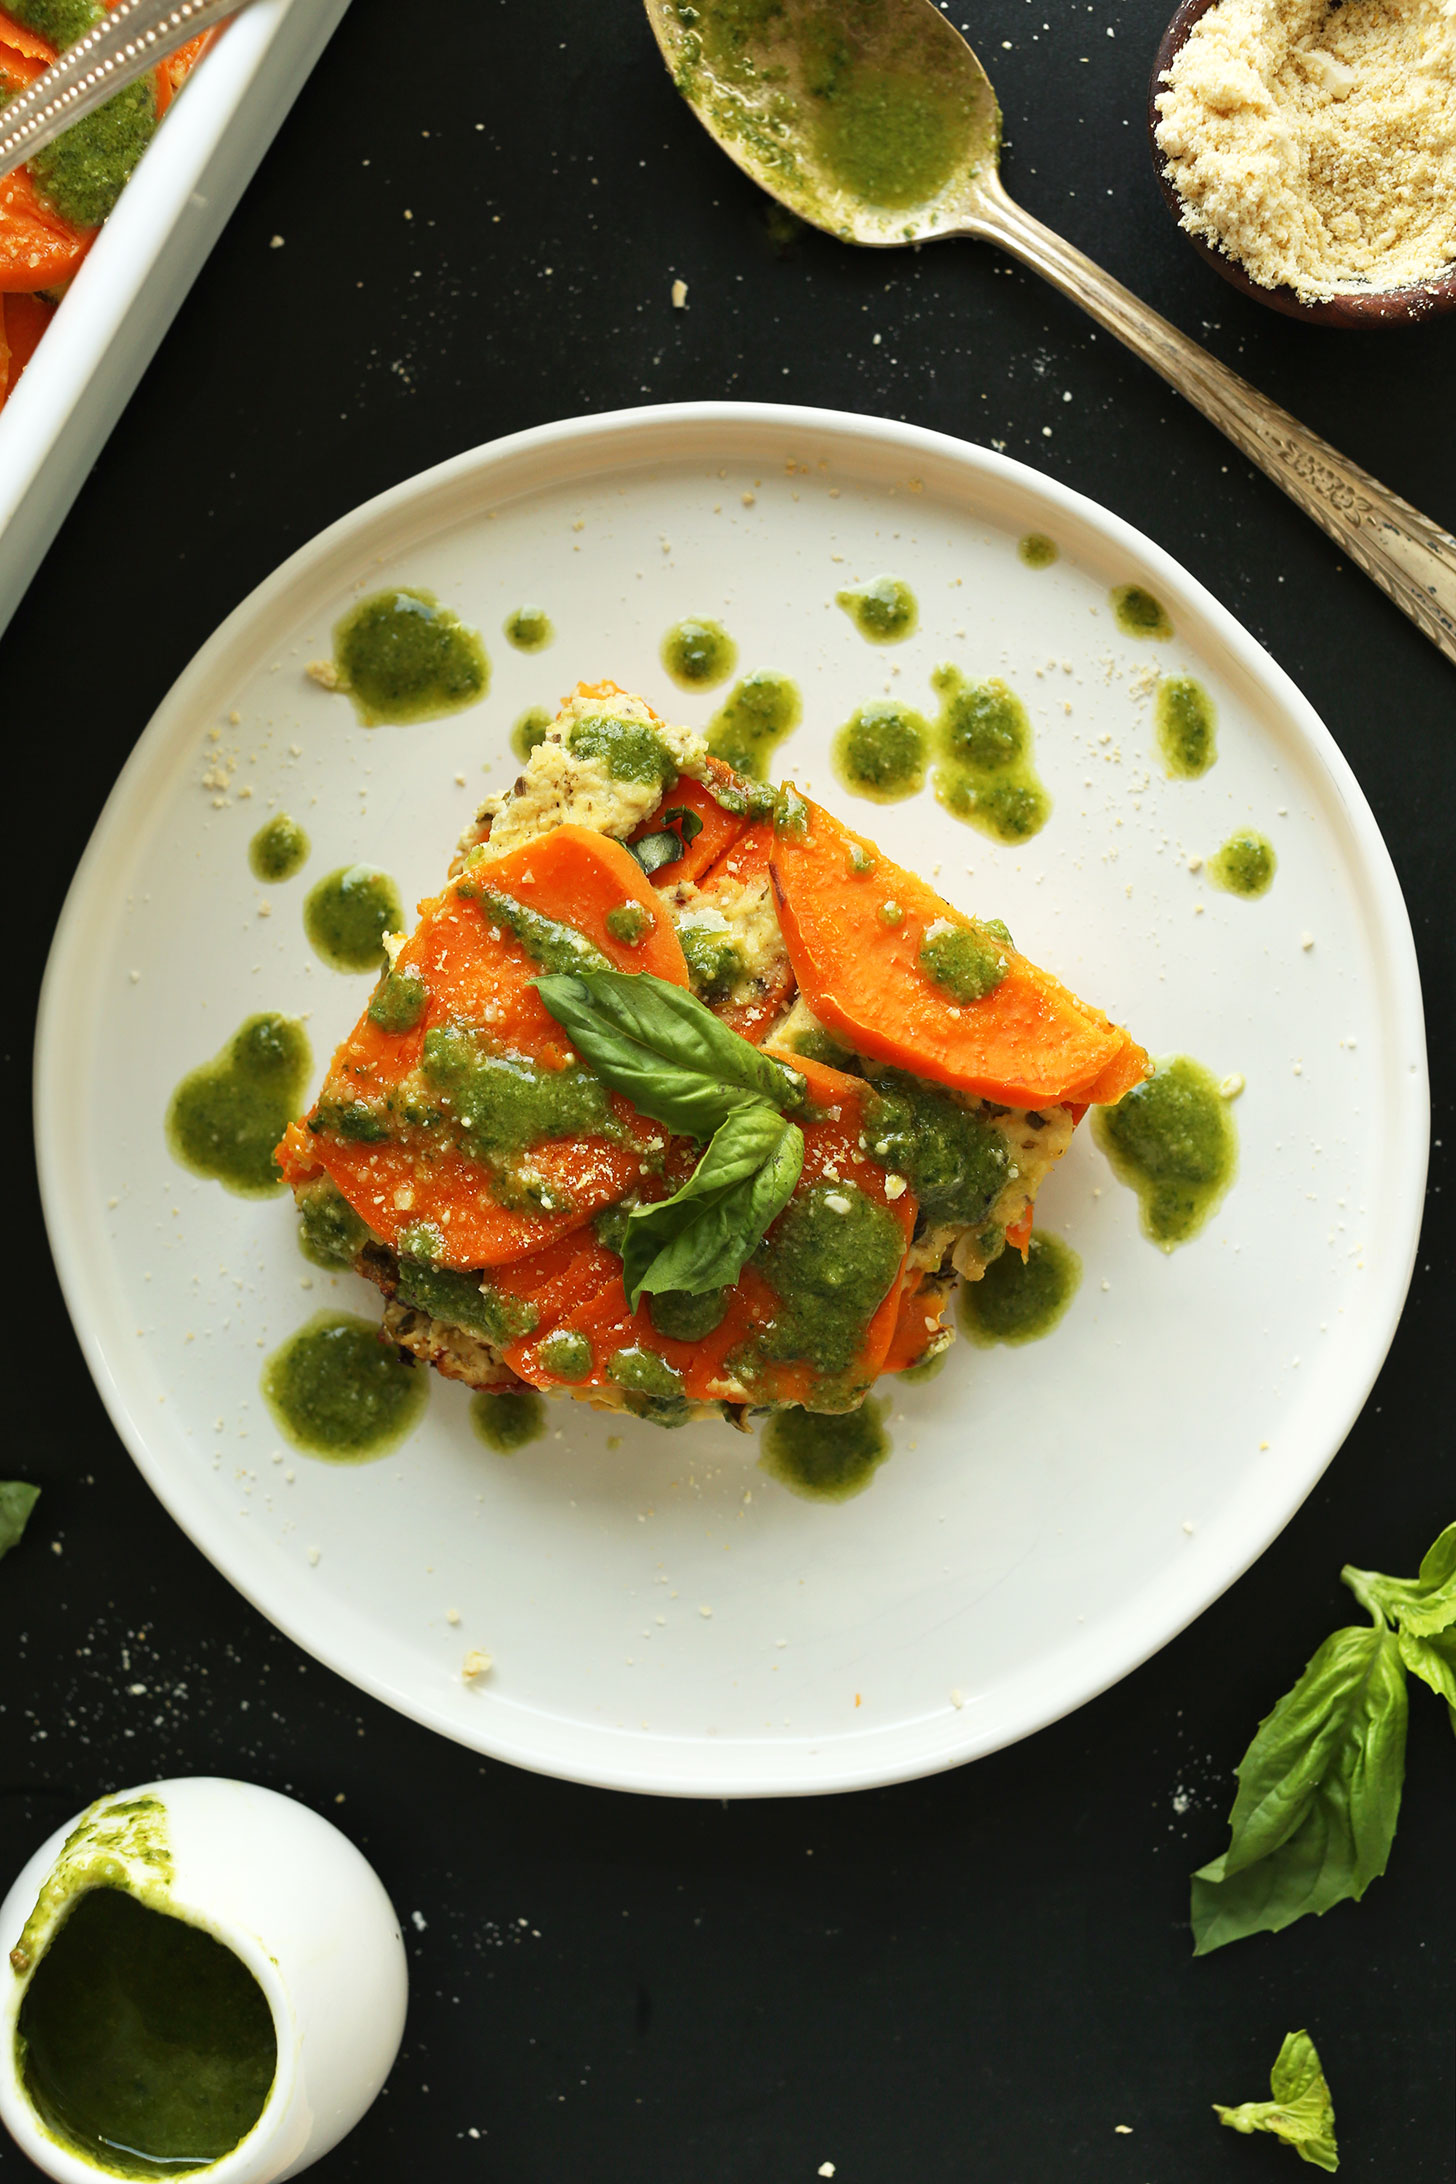 Plate with a serving of our Easy Vegan Sweet Potato Lasagna Recipe